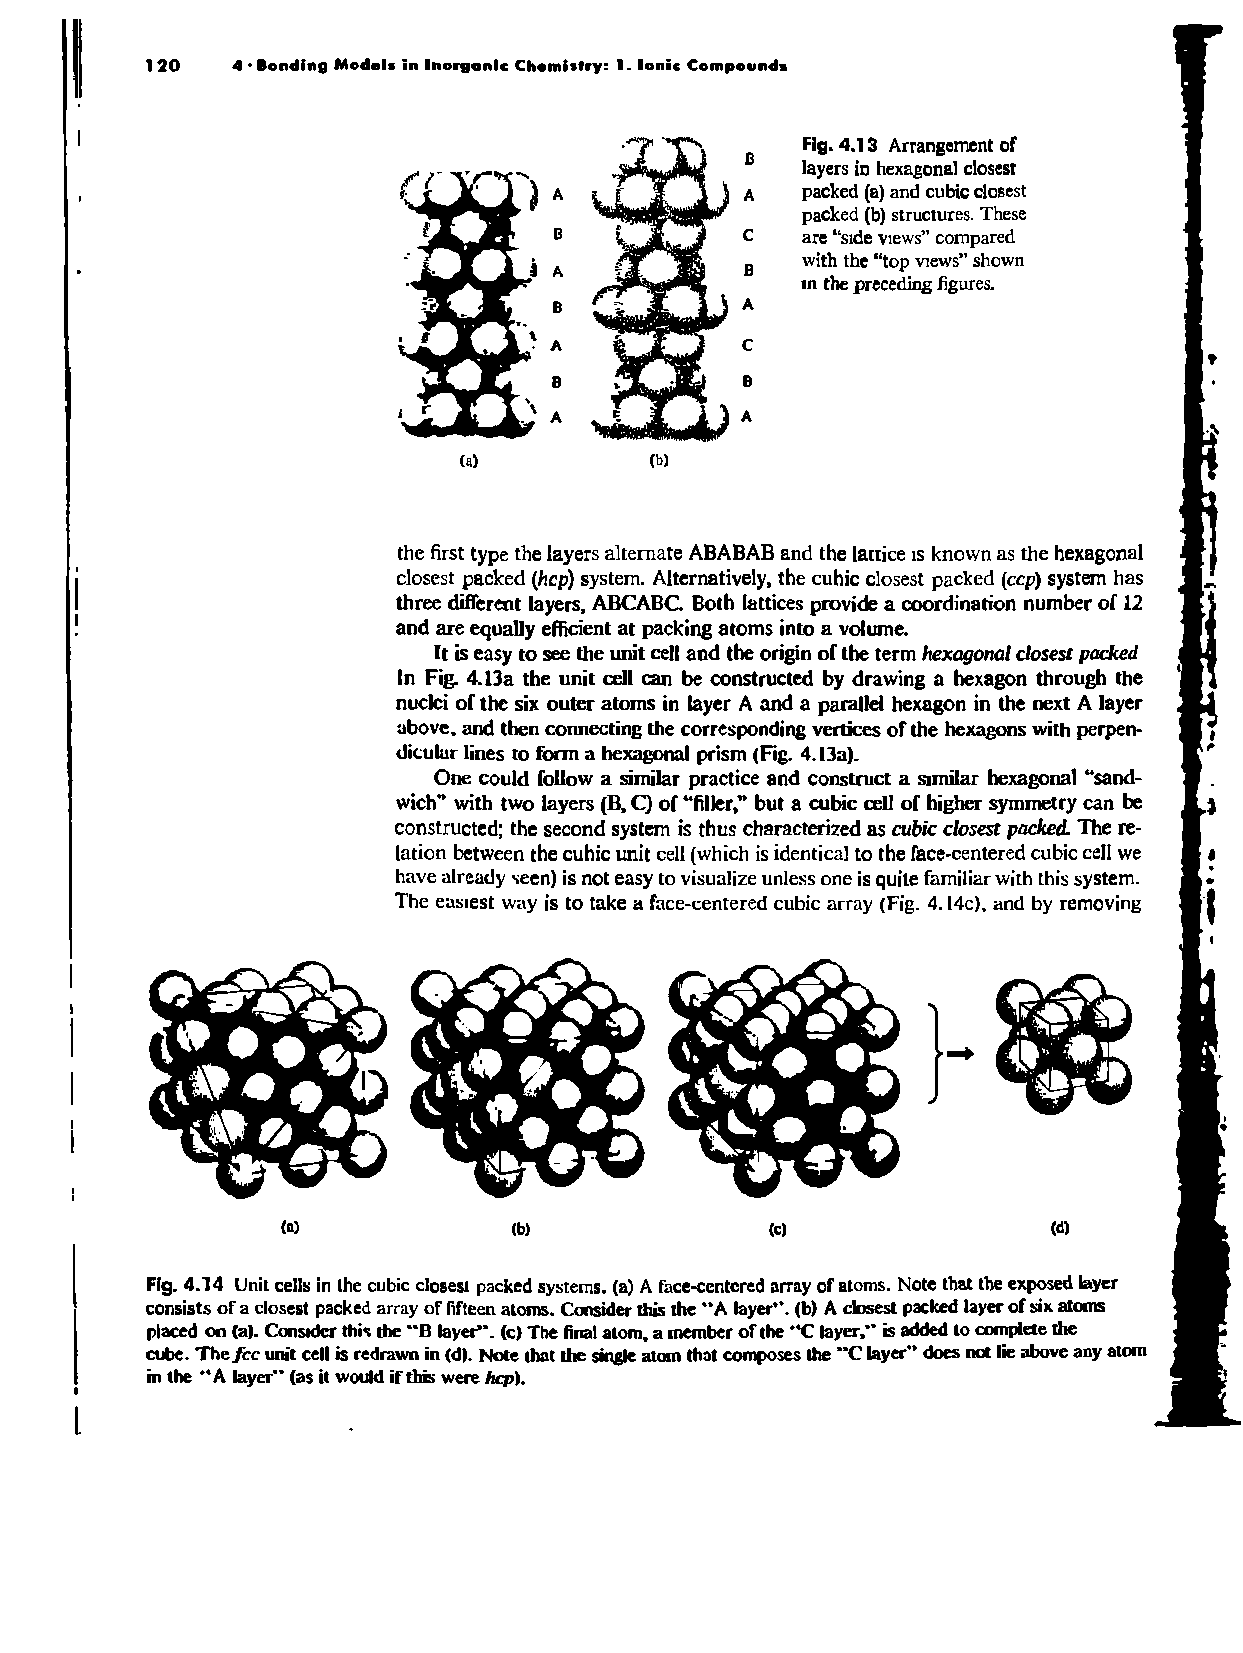 Fig. 4.14 Unit cells in the cubic closest packed systems, (a) A face-ccntcred array of atoms. Note that the exposed layer consists of a closest packed array of fifteen atoms. Consider this the A layer , (b) A closest packed layer of six atoms placed on (a). Consider this the B layer, (c) The final atom, a member of the C layer, is added to complete the cube. The fee unit cell is redrawn in (d. Note that the single atom that composes the C layer does net lie above any atom in the A layer (as it would if ths were hep).